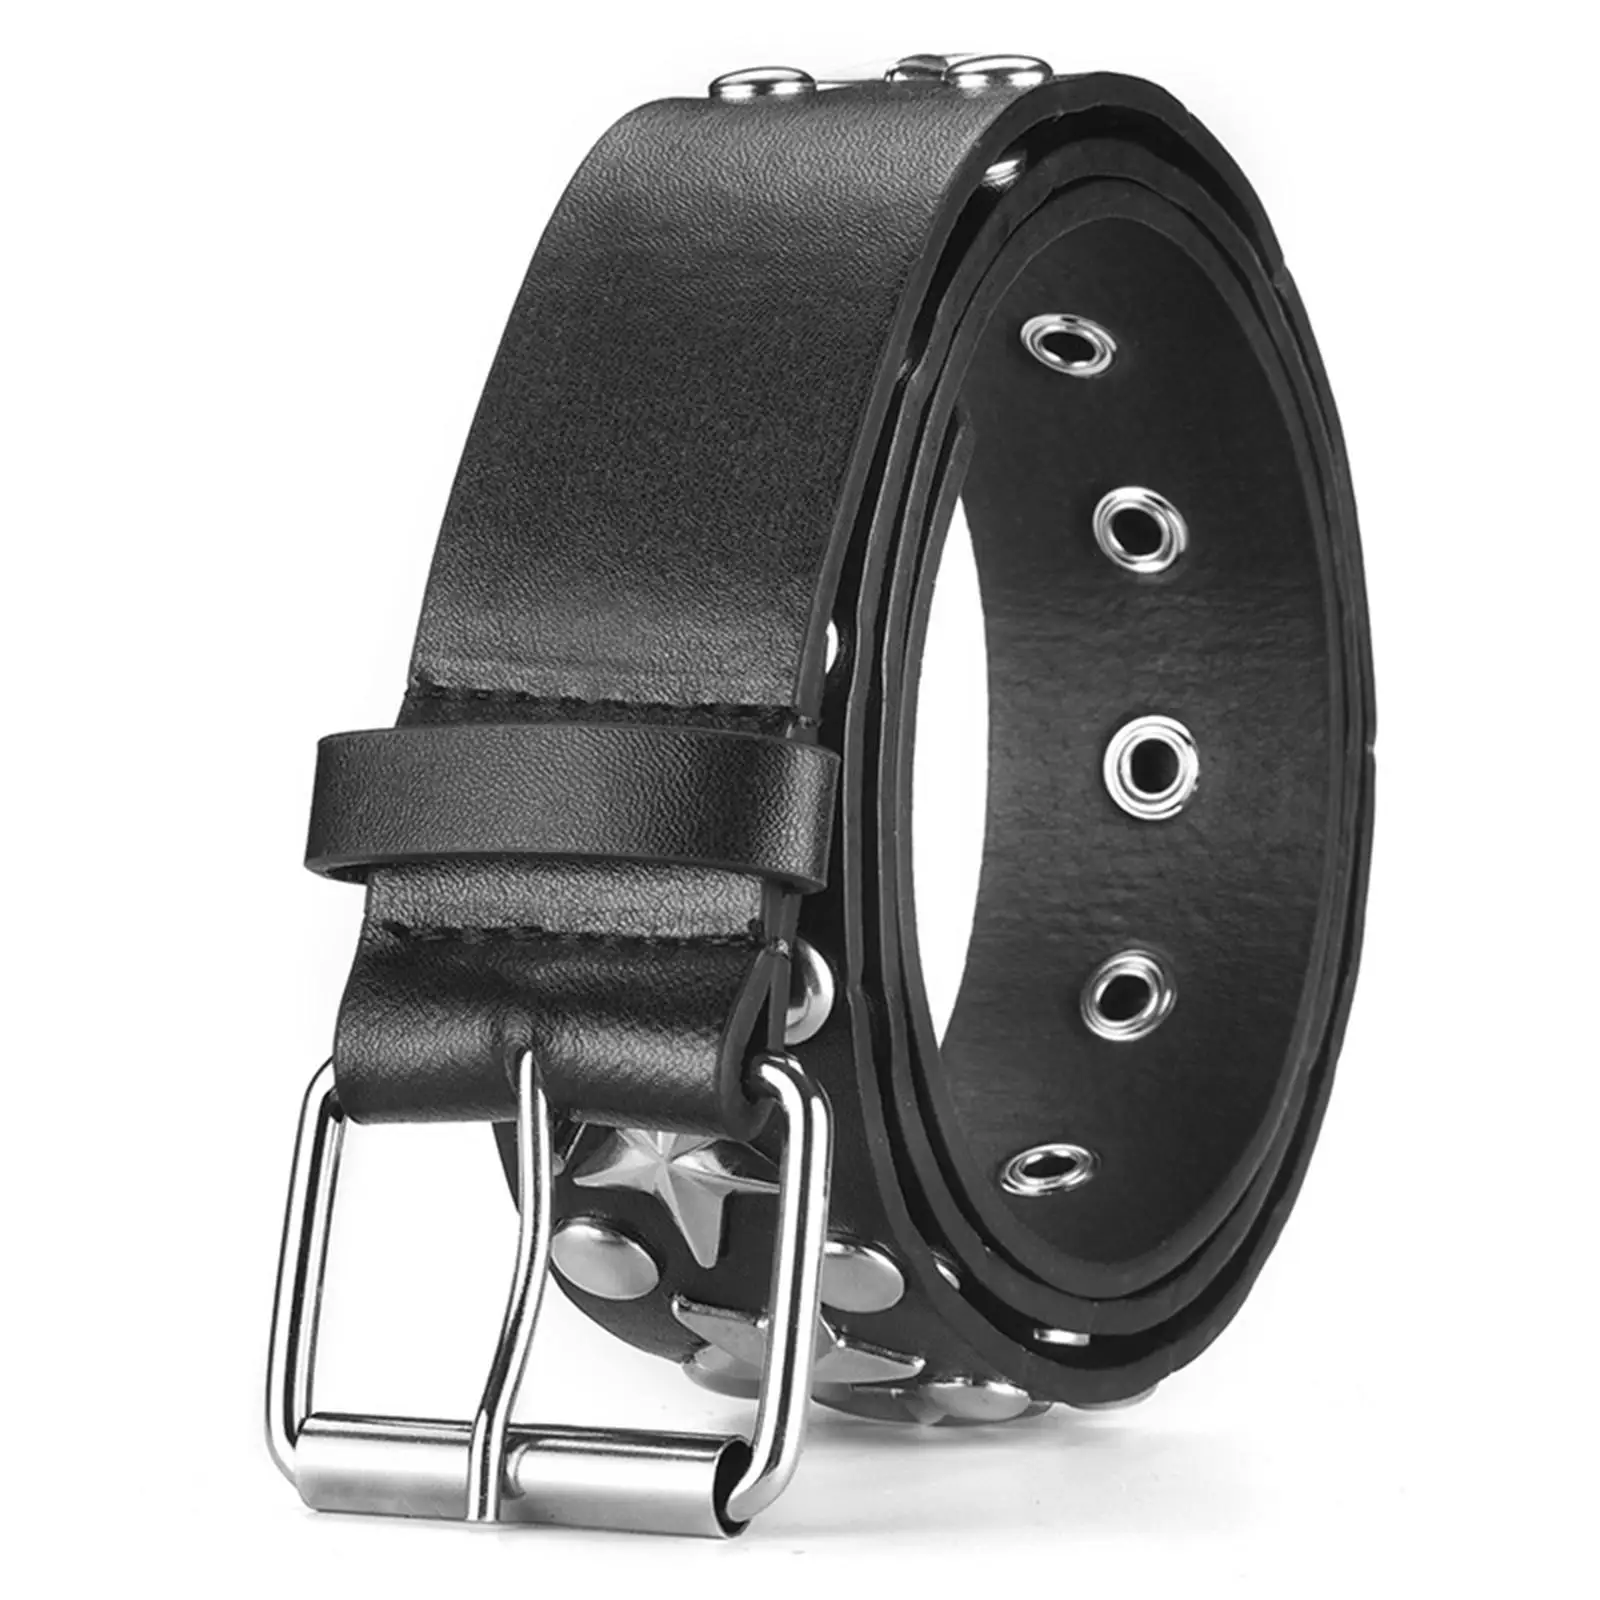 Women Belt Waist Belt Casual Single Eyelet Waistband Pin Buckle Female Adjustable PU Leather for Jeans Dress Dancing Club Party